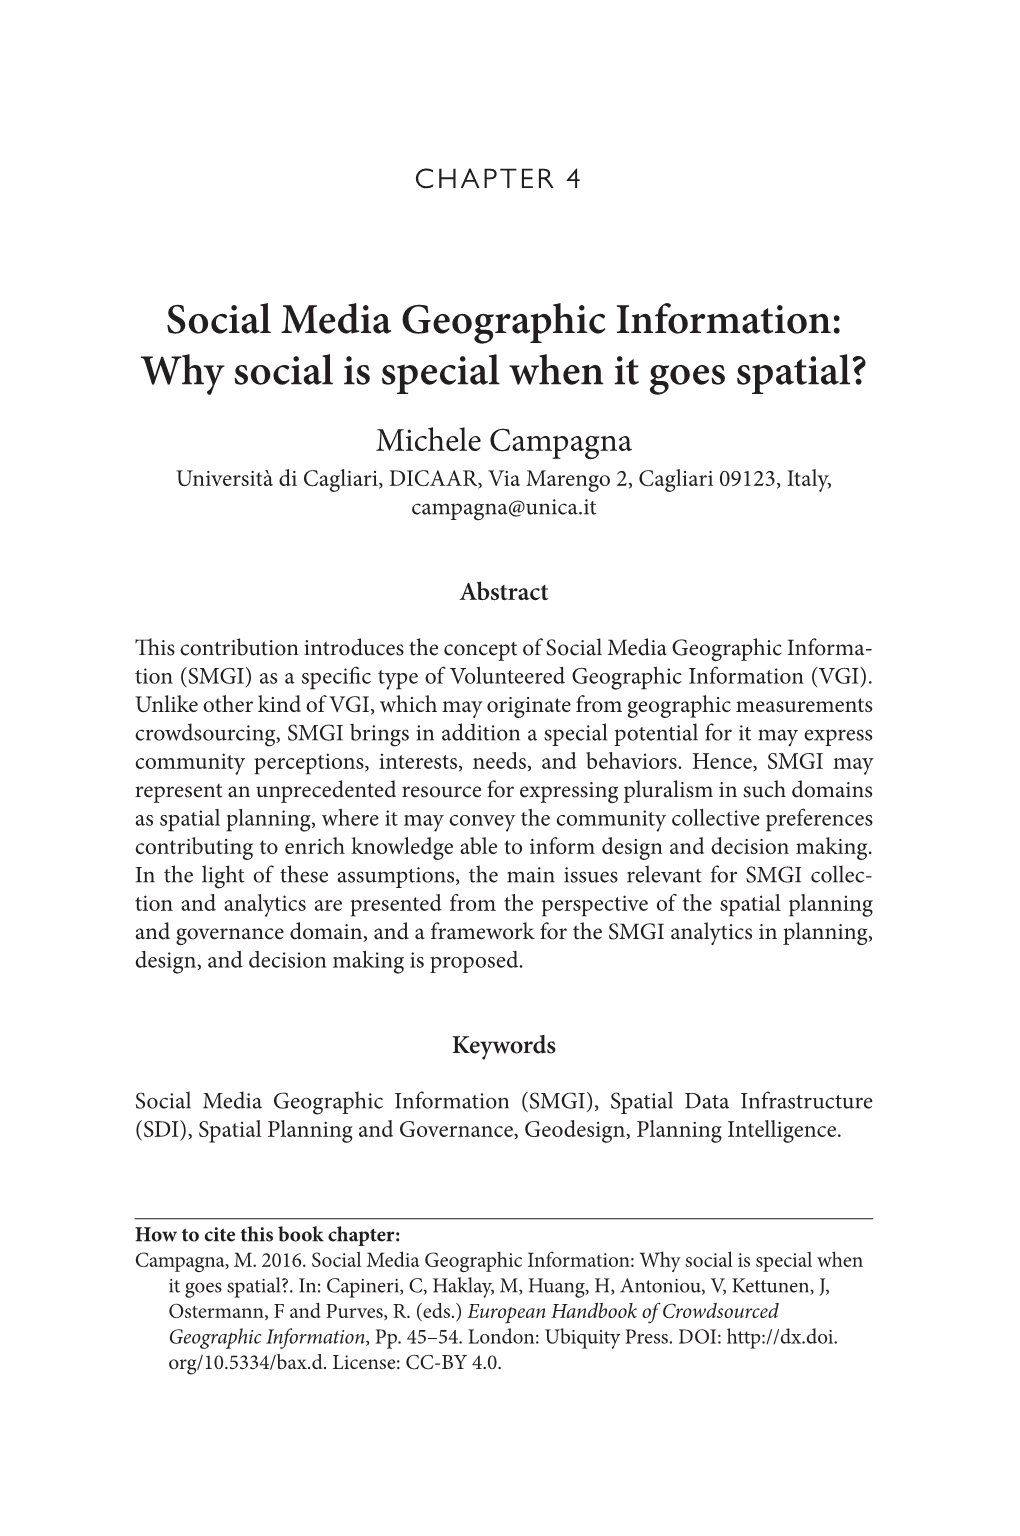 Social Media Geographic Information: Why Social Is Special When It Goes